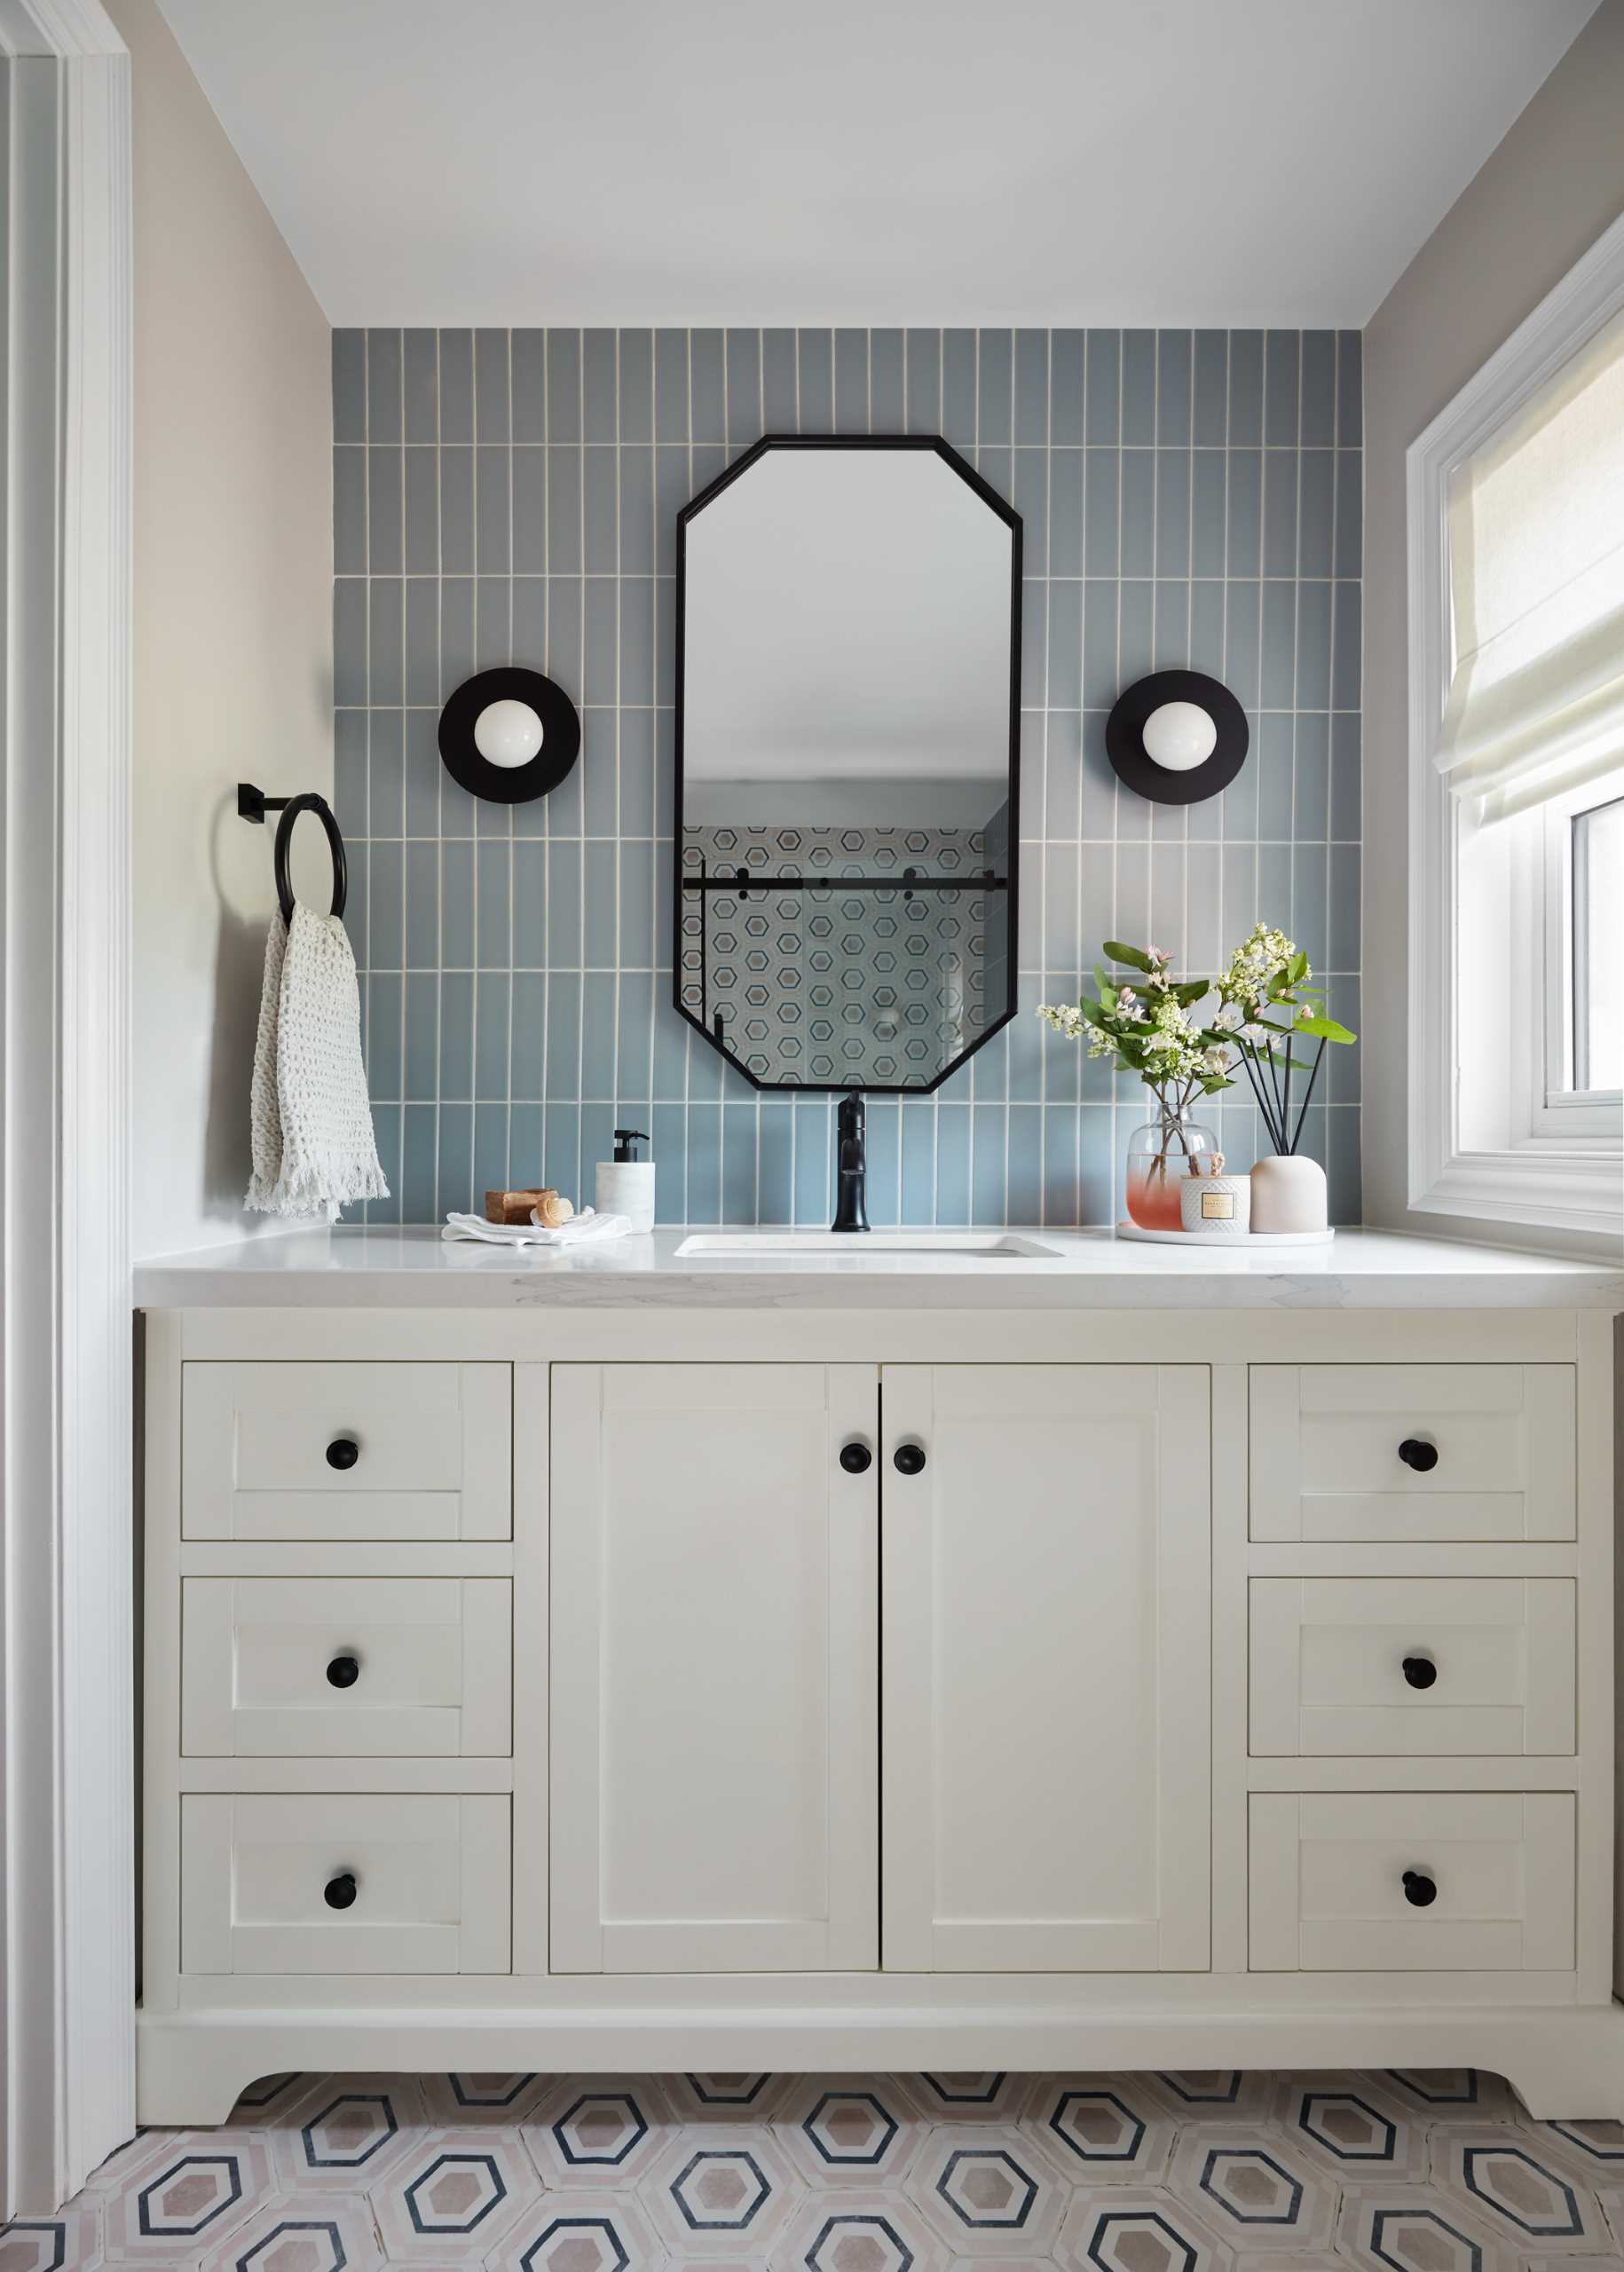 In this primary bathroom, blue-grey tiles line the wall, while patterned hexagonal tiles feature on the floor.